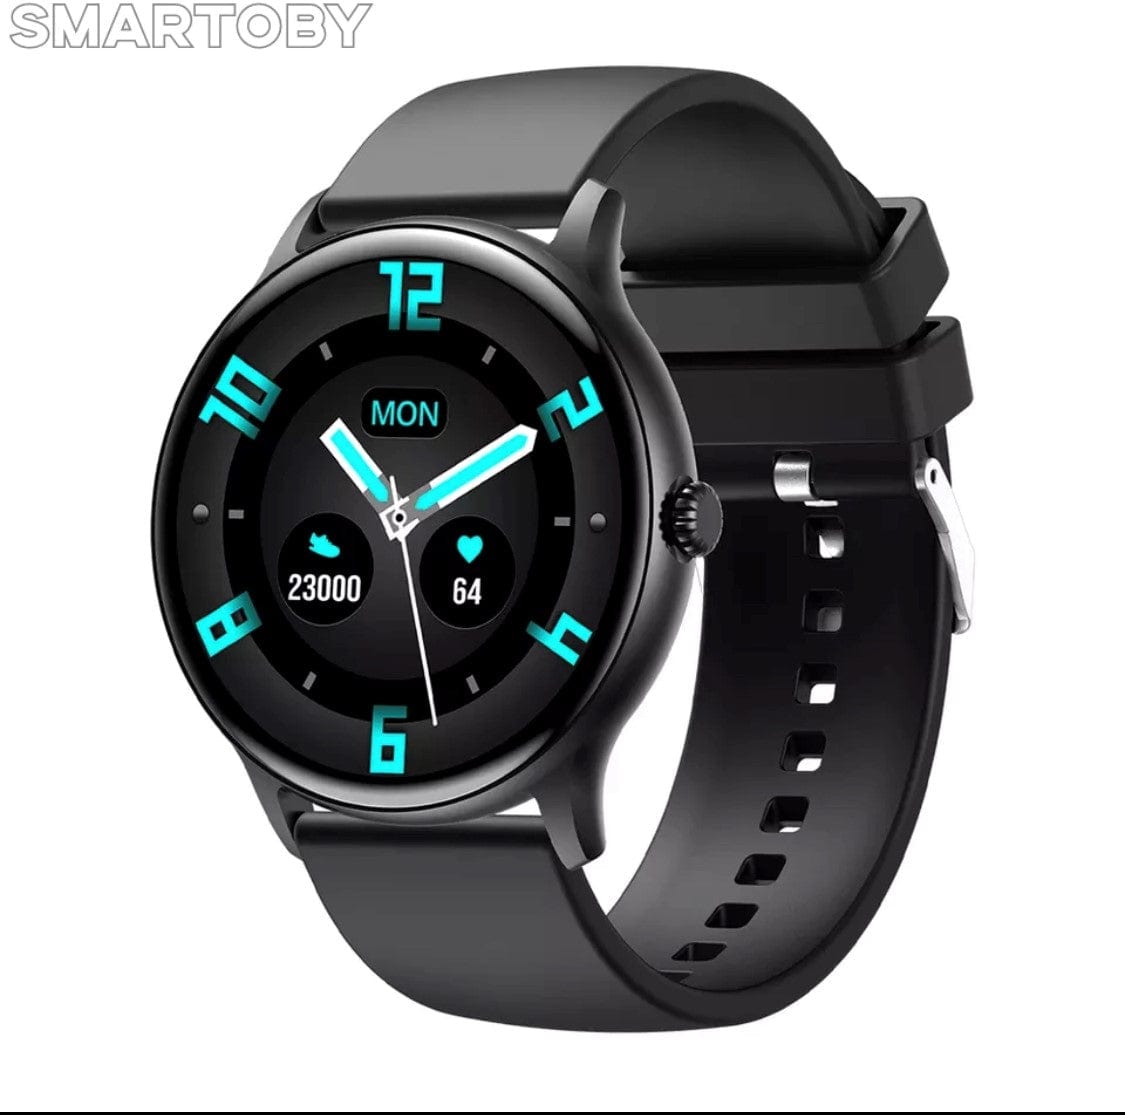 Smart Watch South Africa Watches Silver Smartoby Dafit i10 BT Call Smart Watch Silver